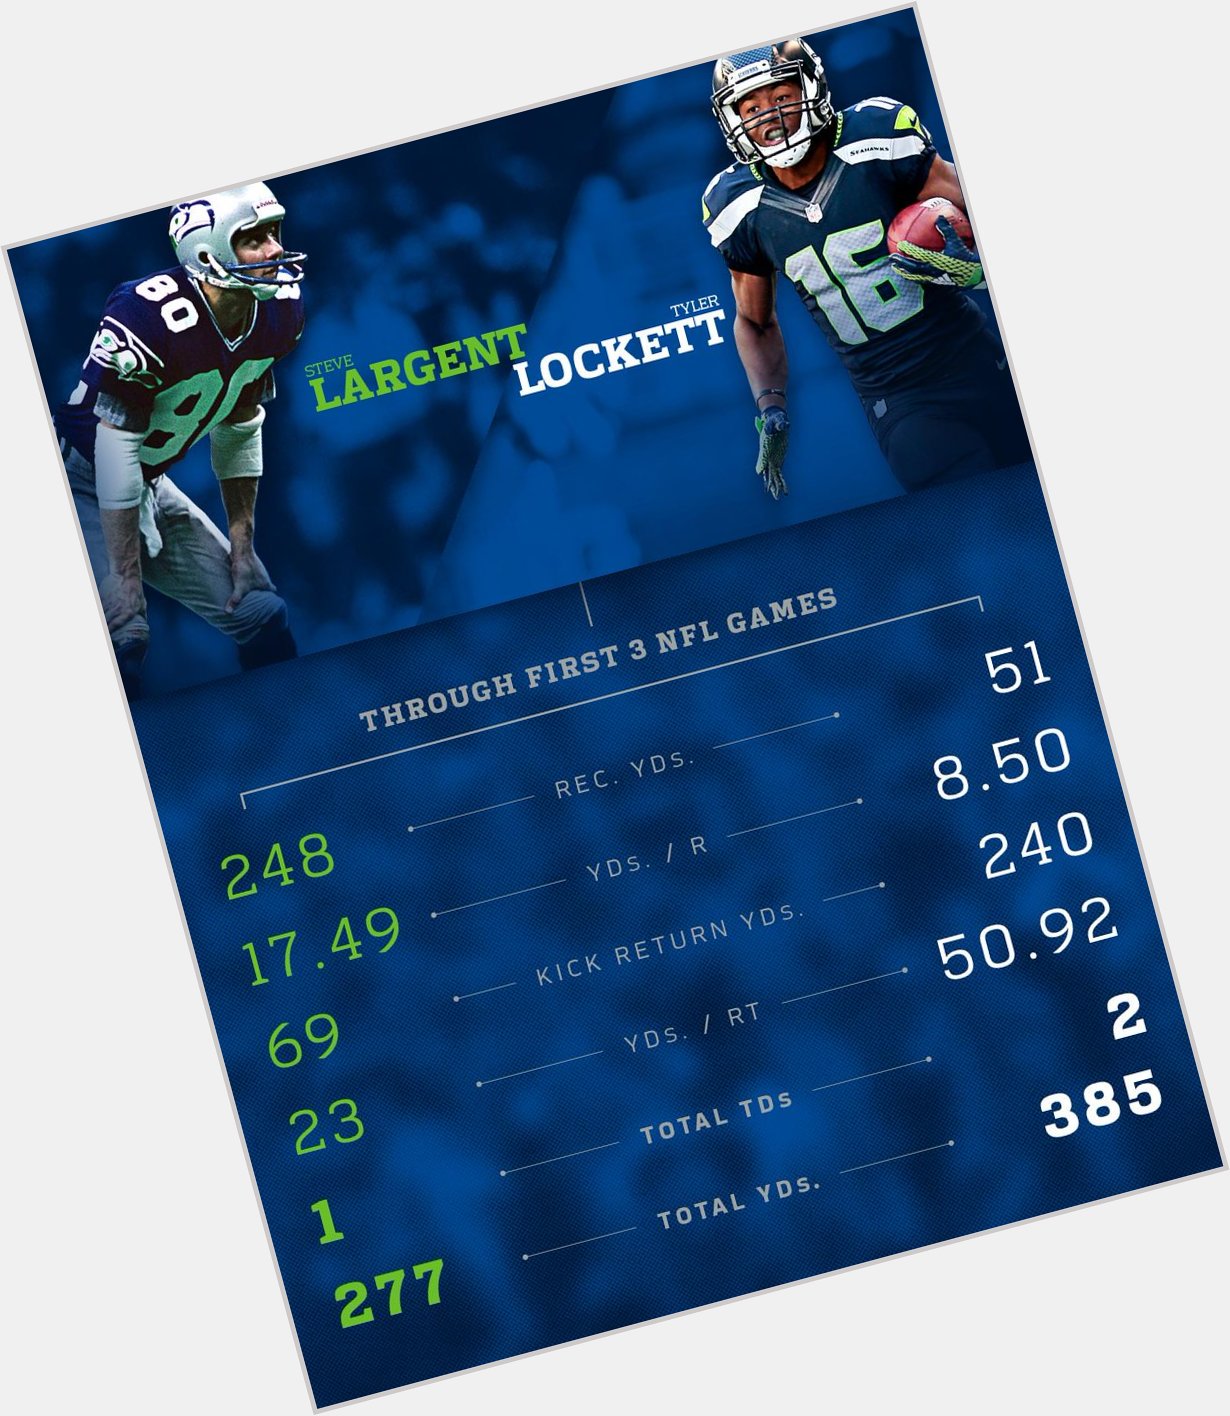 ? Largent.
Lockett.
Same position.
Same birthday. 
One a legend. 
The other..
[ 